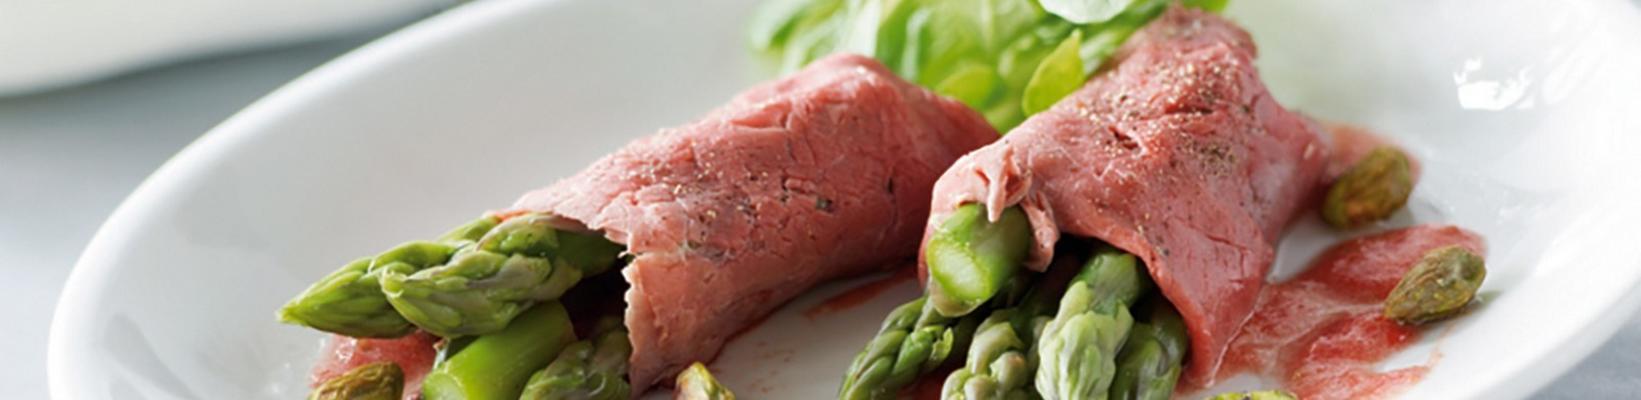 roast beef rolls with gazpacho dressing and roasted pistachios